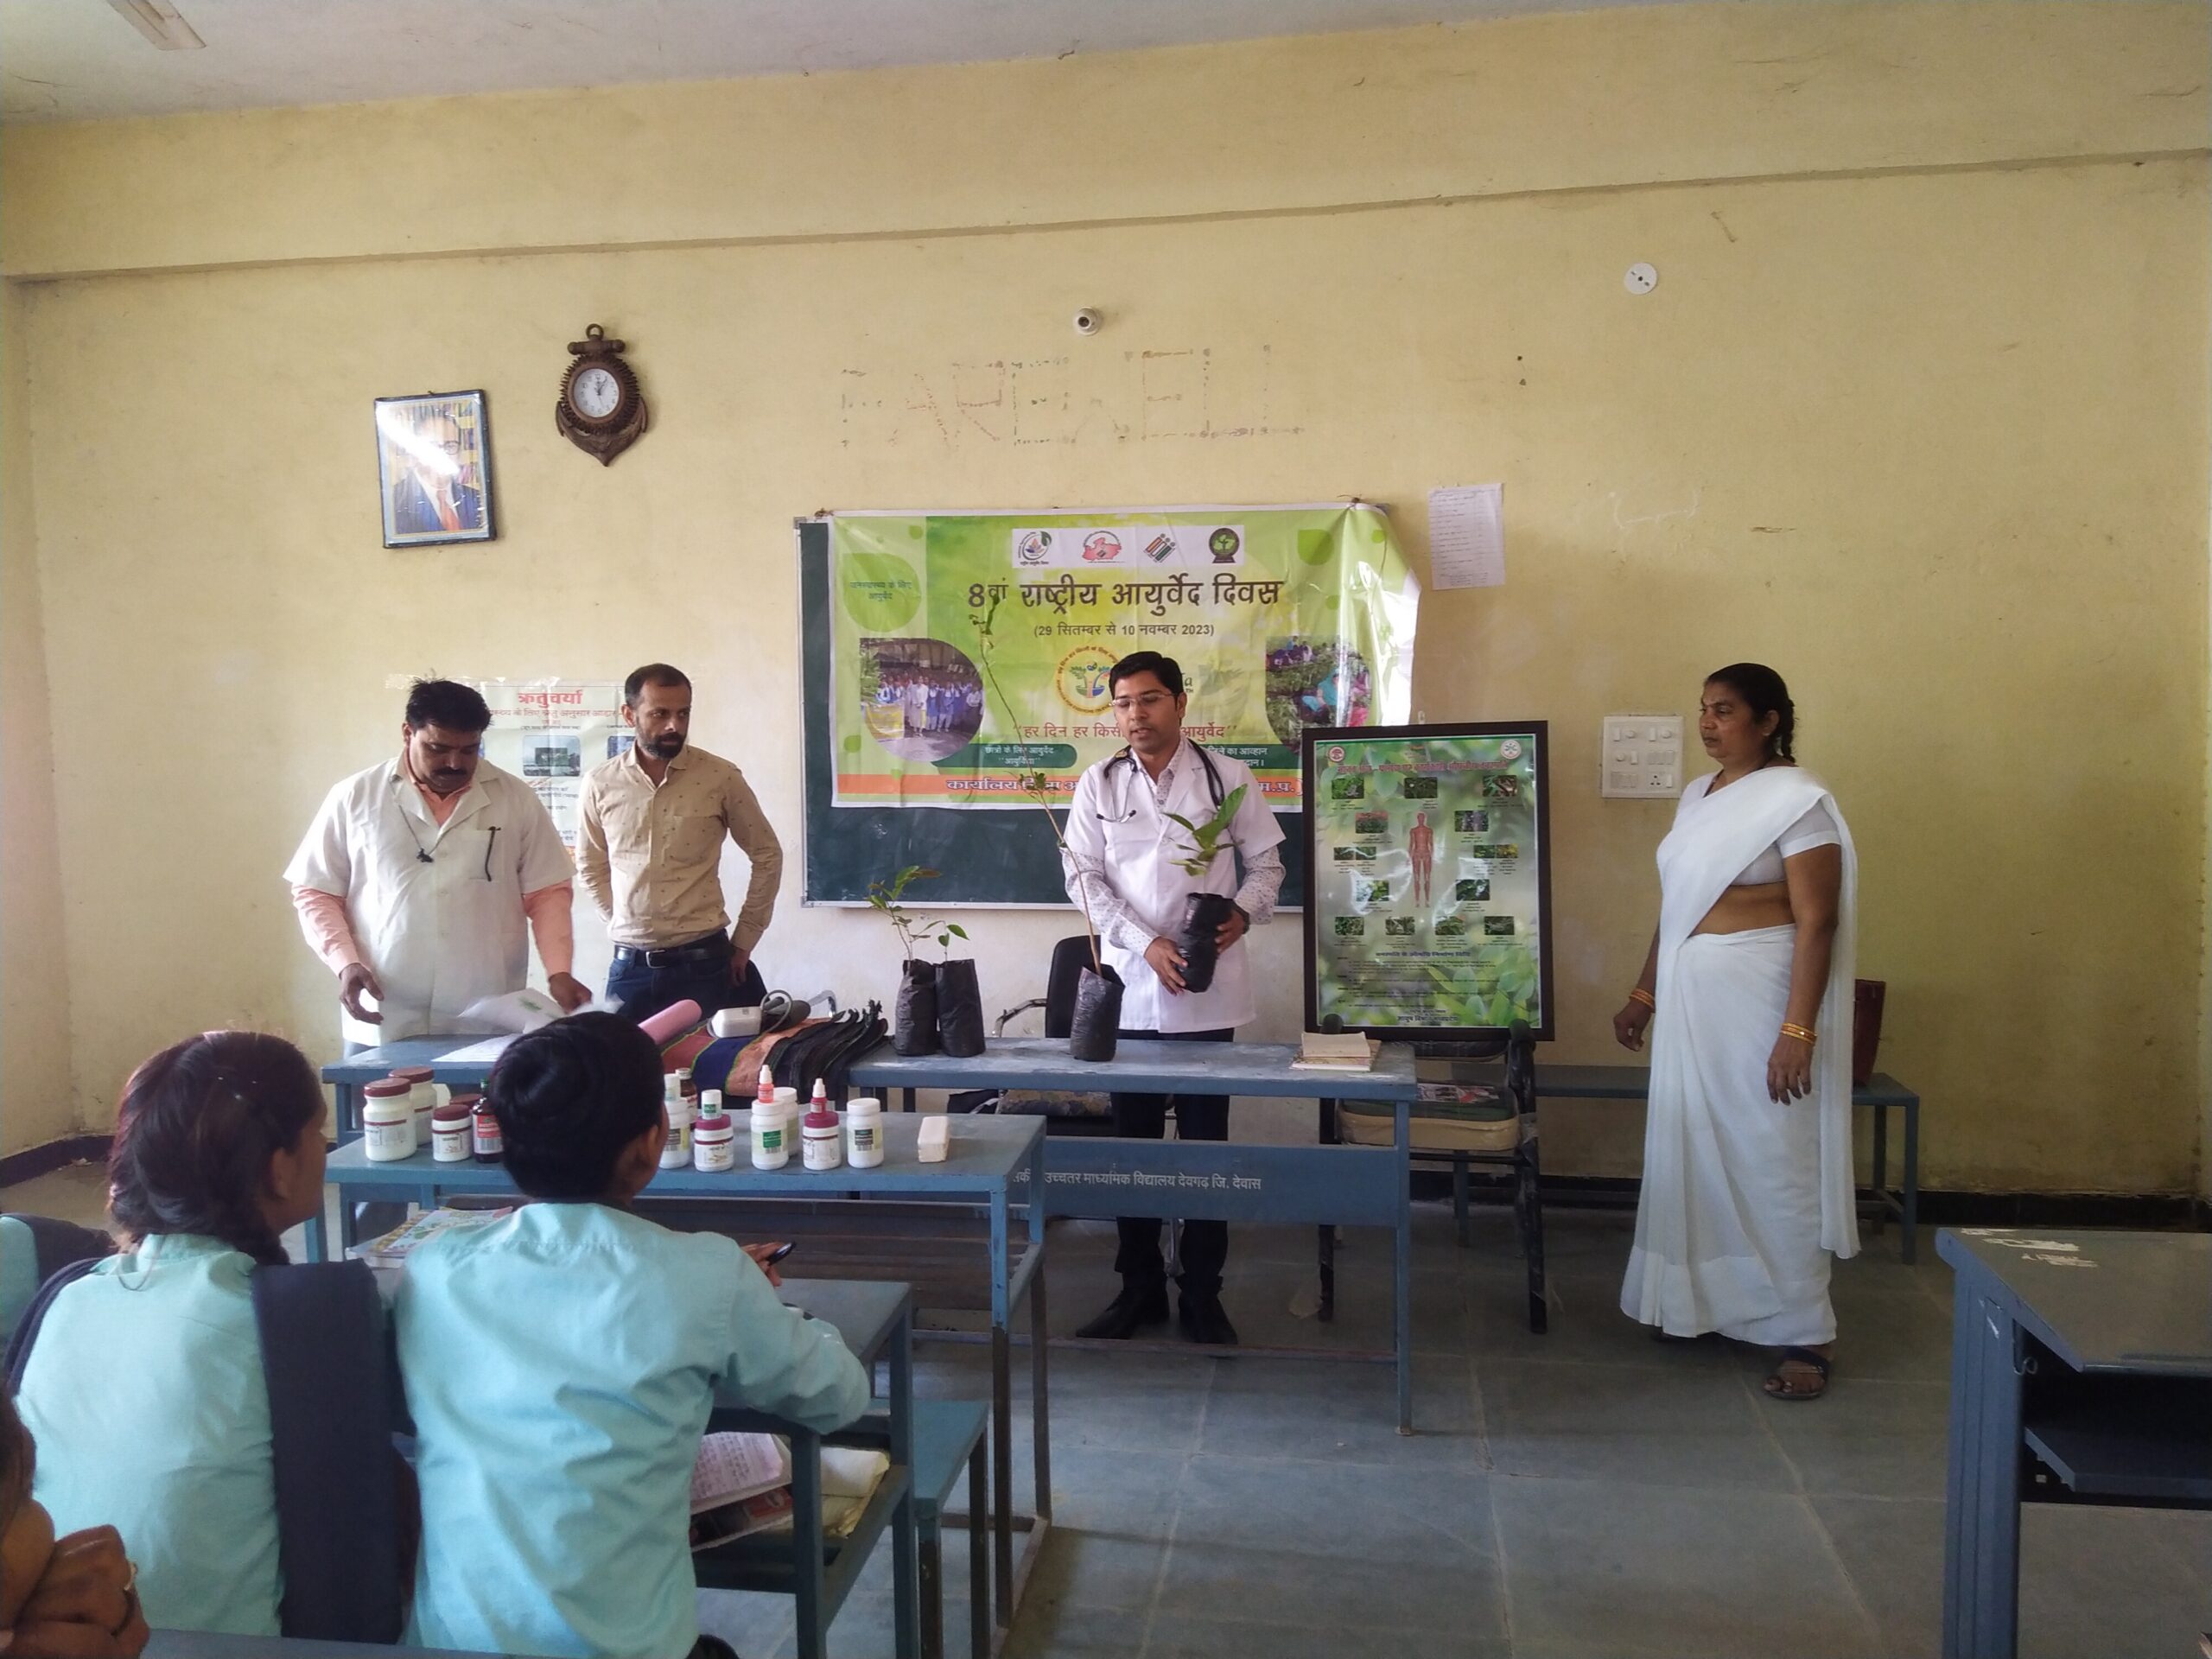 Health camp held in govt middle school Deogarh on theme of use of ayurved in our daily life.general awareness of local ayurvedic medicinal plants with benefits of yog